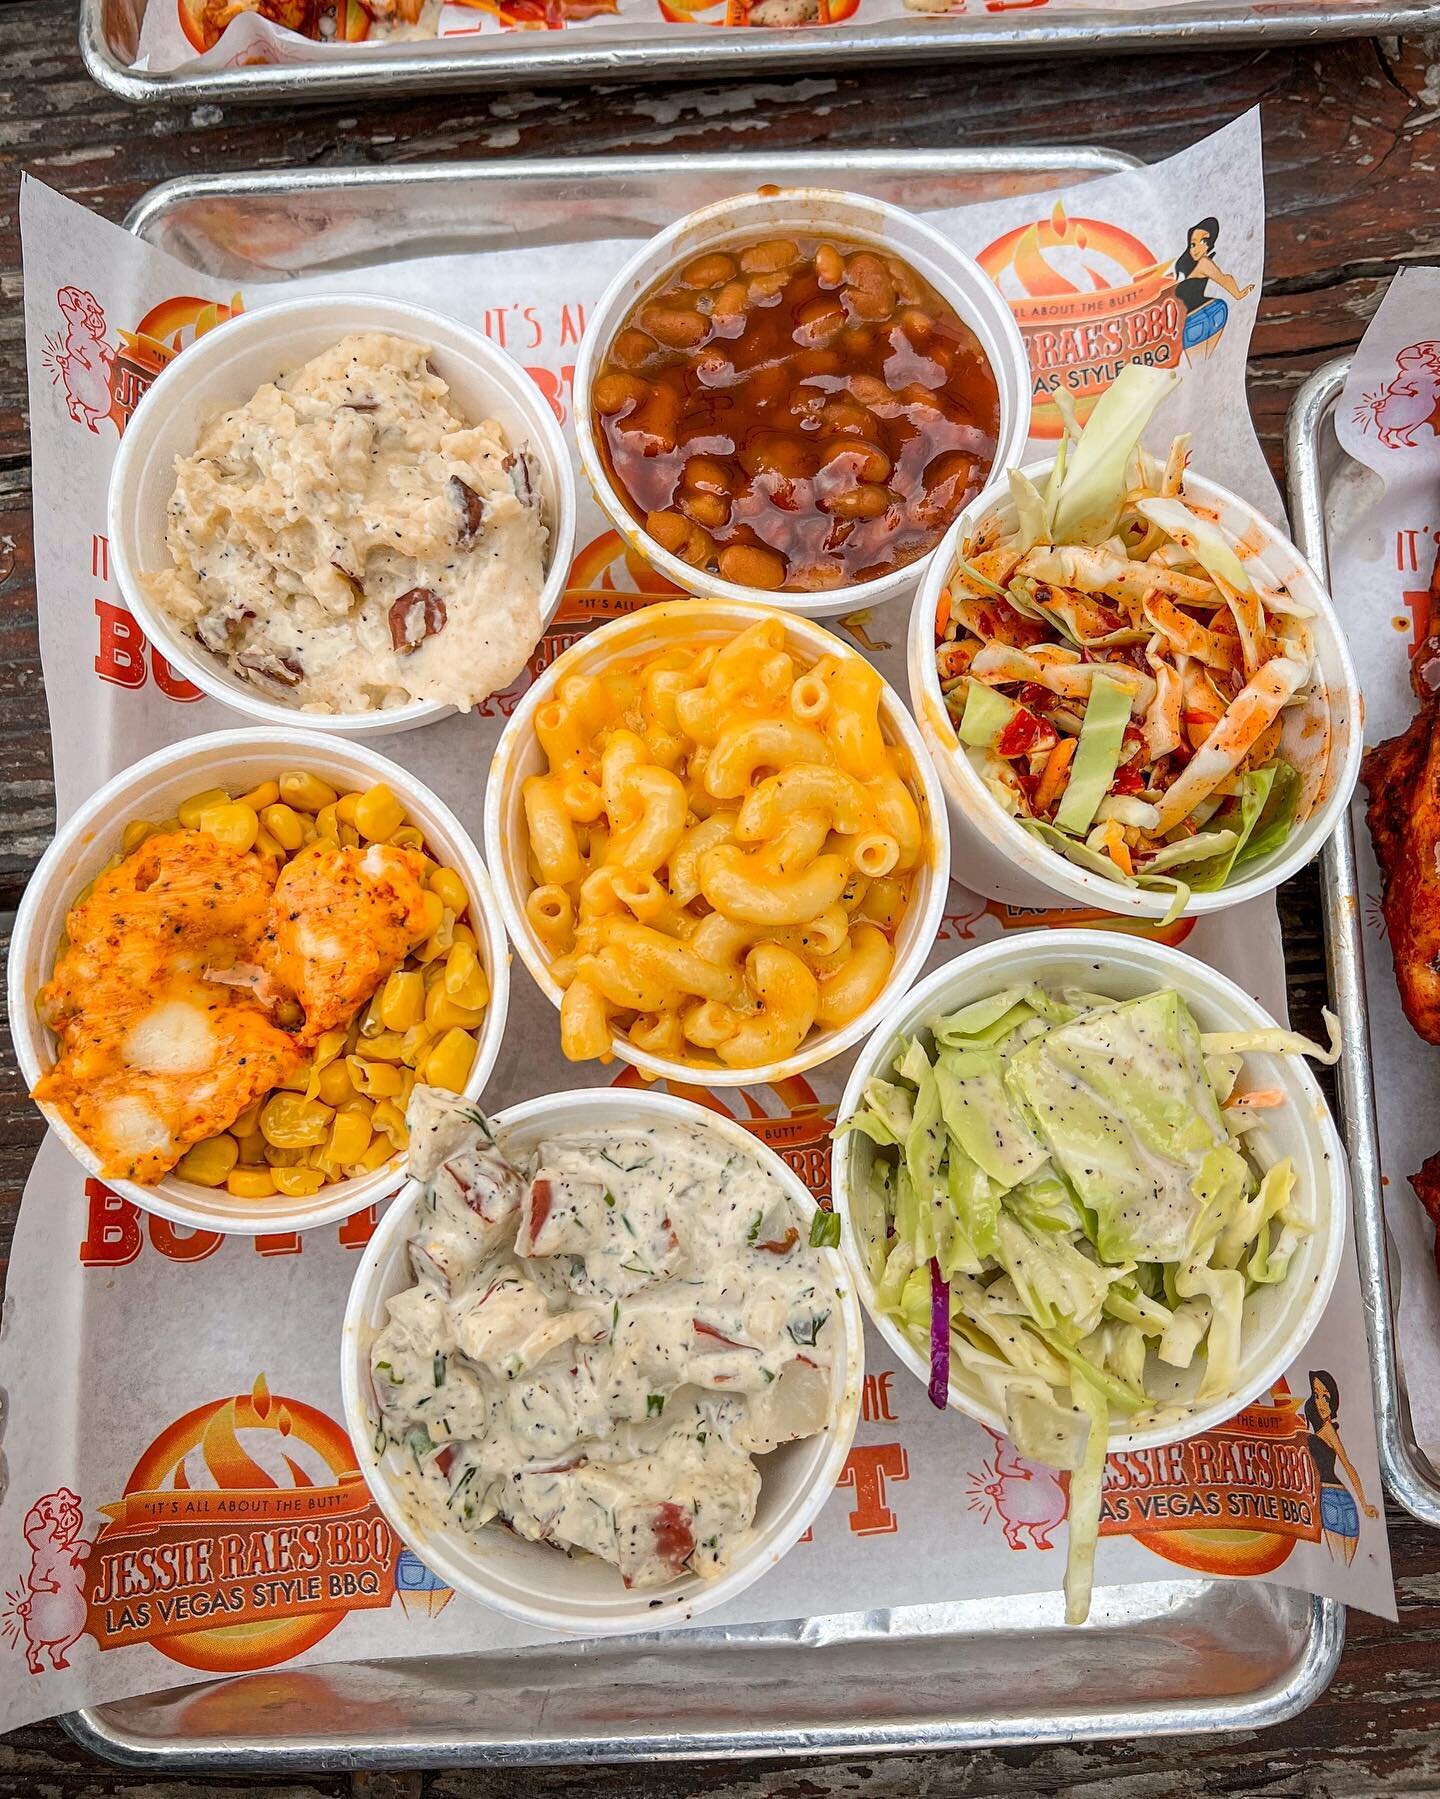 You can only PICK ONE&mdash; What is your favorite ⁉️ 😎

📸 THE SIDES
Jessies Mac &amp; Cheese &bull; BBQ Mash Potatoes &bull; Vegas Slaw &bull; BBQ Baked Beans &bull; Corn with Smoked Butter 

🔥Jessie Rae's BBQ🔥
‼️TWO LOCATIONS‼️

📍Las Vegas - 5